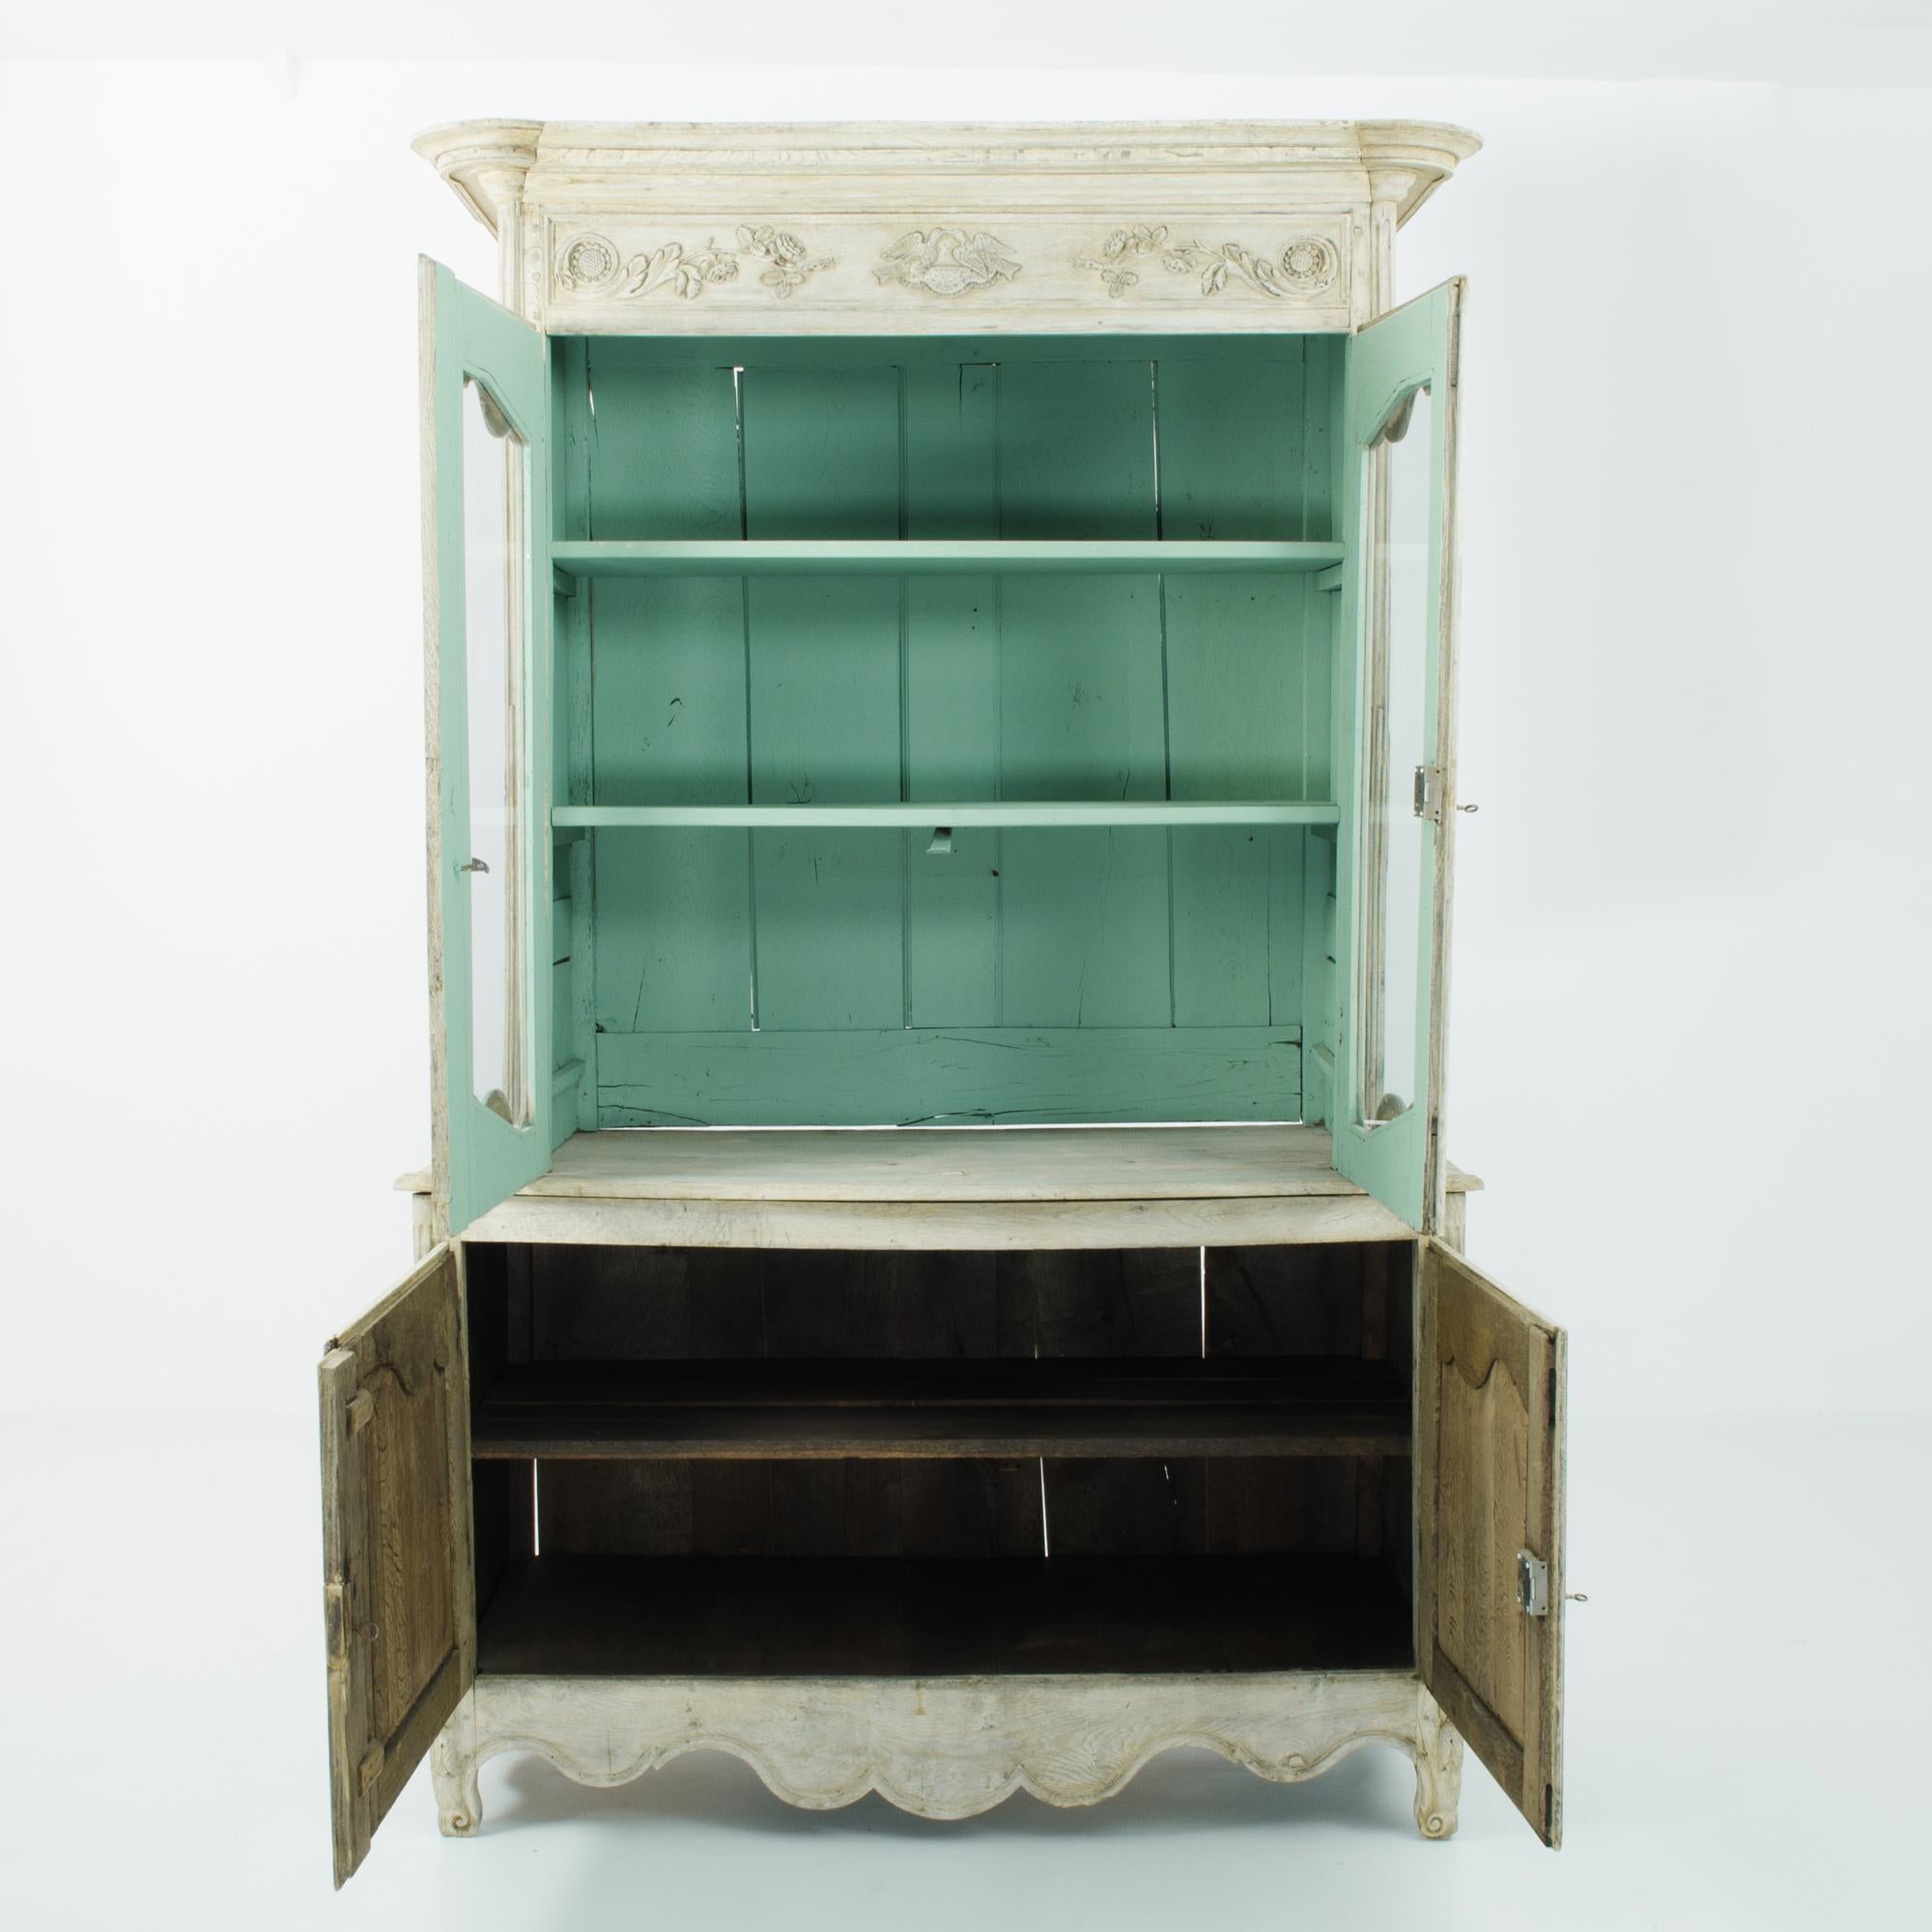 This two-part bleached oak vitrine was made in France, circa 1800. Imparting the refined and idyllic air of a rustic farmhouse-- this wholesome pantry features a shelved interior painted a lighthearted green, visible through the glass panes in the